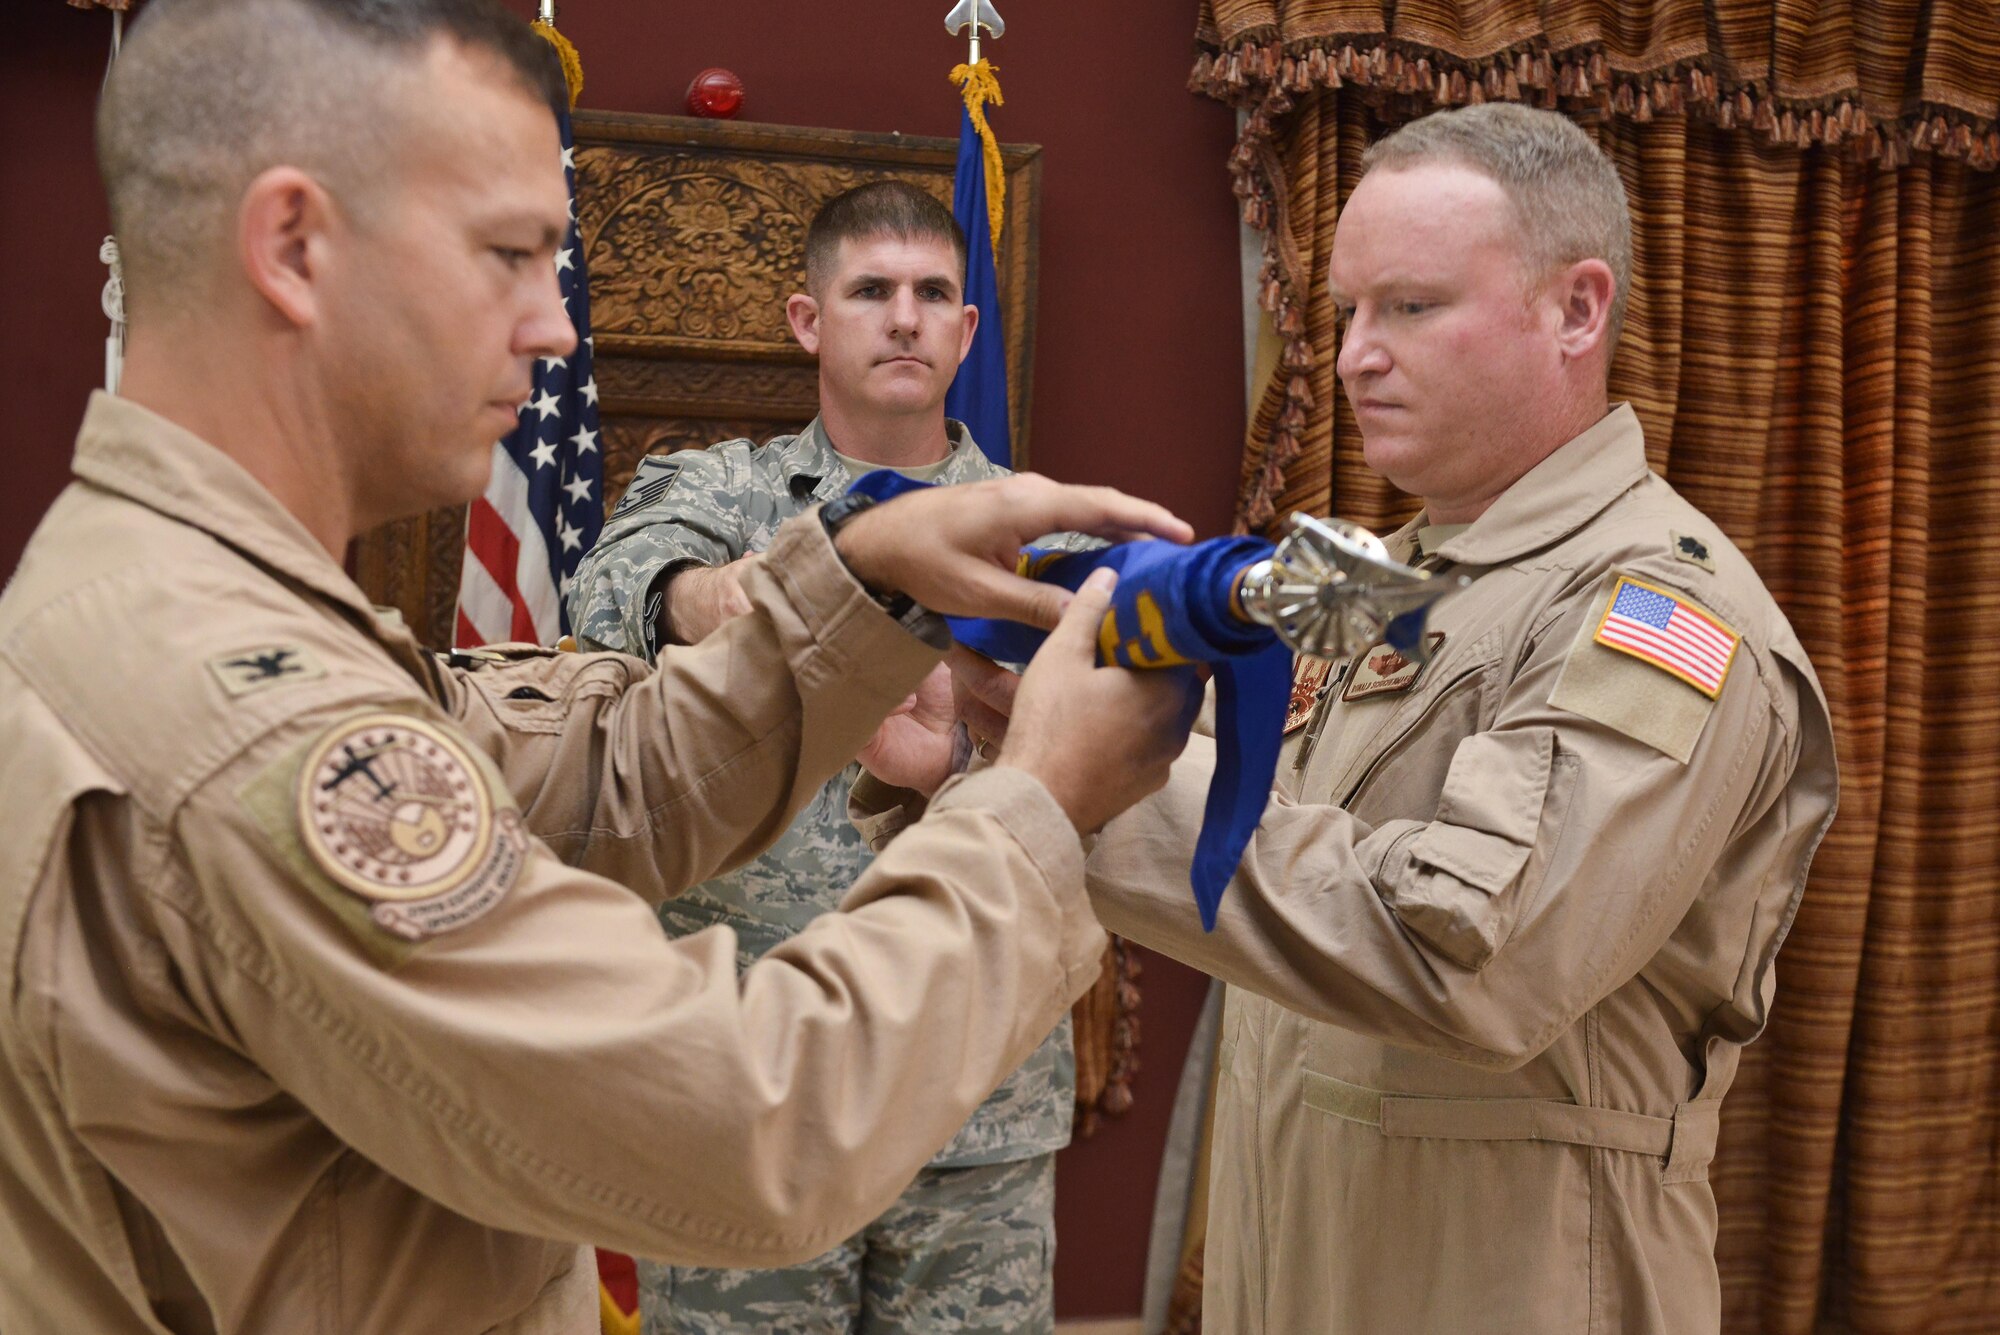 Col. James Dittus, 379th Expeditionary Operations Group commander and Lt. Col Ronald Schochenmaier, 22d Expeditionary Air Refueling Squadron commander, unveil the squadron flag during an assumption of command ceremony for the 22d EARS July 24th 2015 at Al Udeid Air Base, Qatar. The 22d was first formed in 1939 primarily as a bomb squadron for World War II. In 2002 it was inactivated as the 22d Air Refueling Squadron and is now re-designated as the 22d EARS supporting operations from Al Udeid Air Base. (U.S. Air Force photo/Staff Sgt. Alexandre Montes)